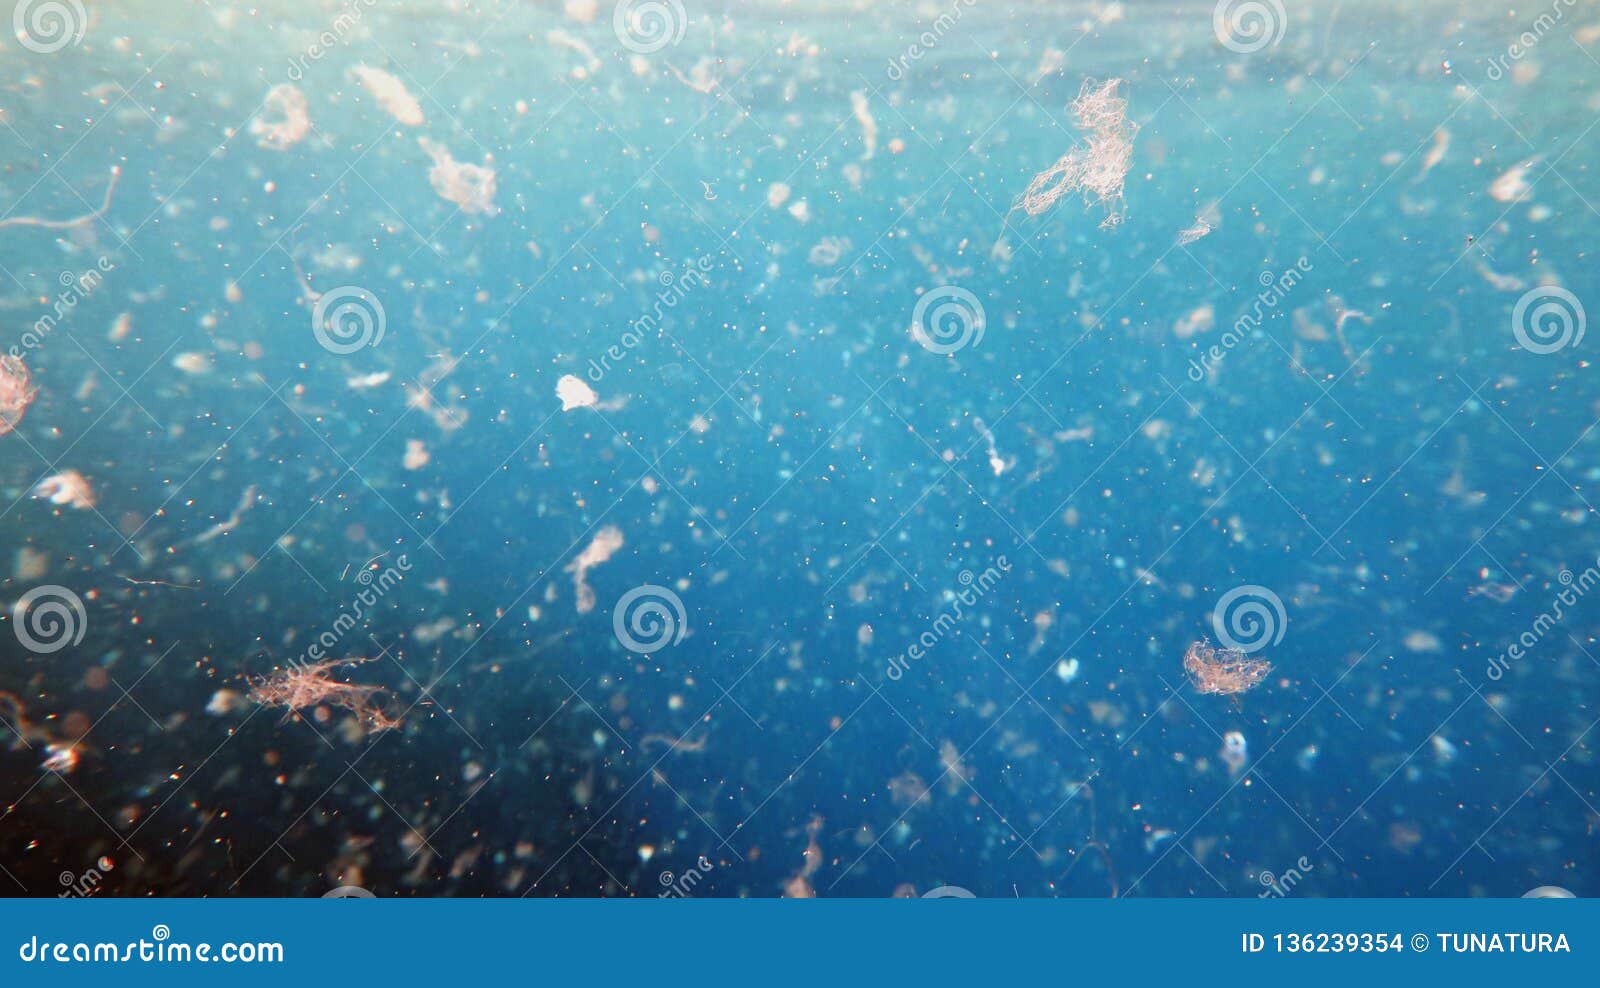 detailed photography of sea water contaminated by micro plastic.